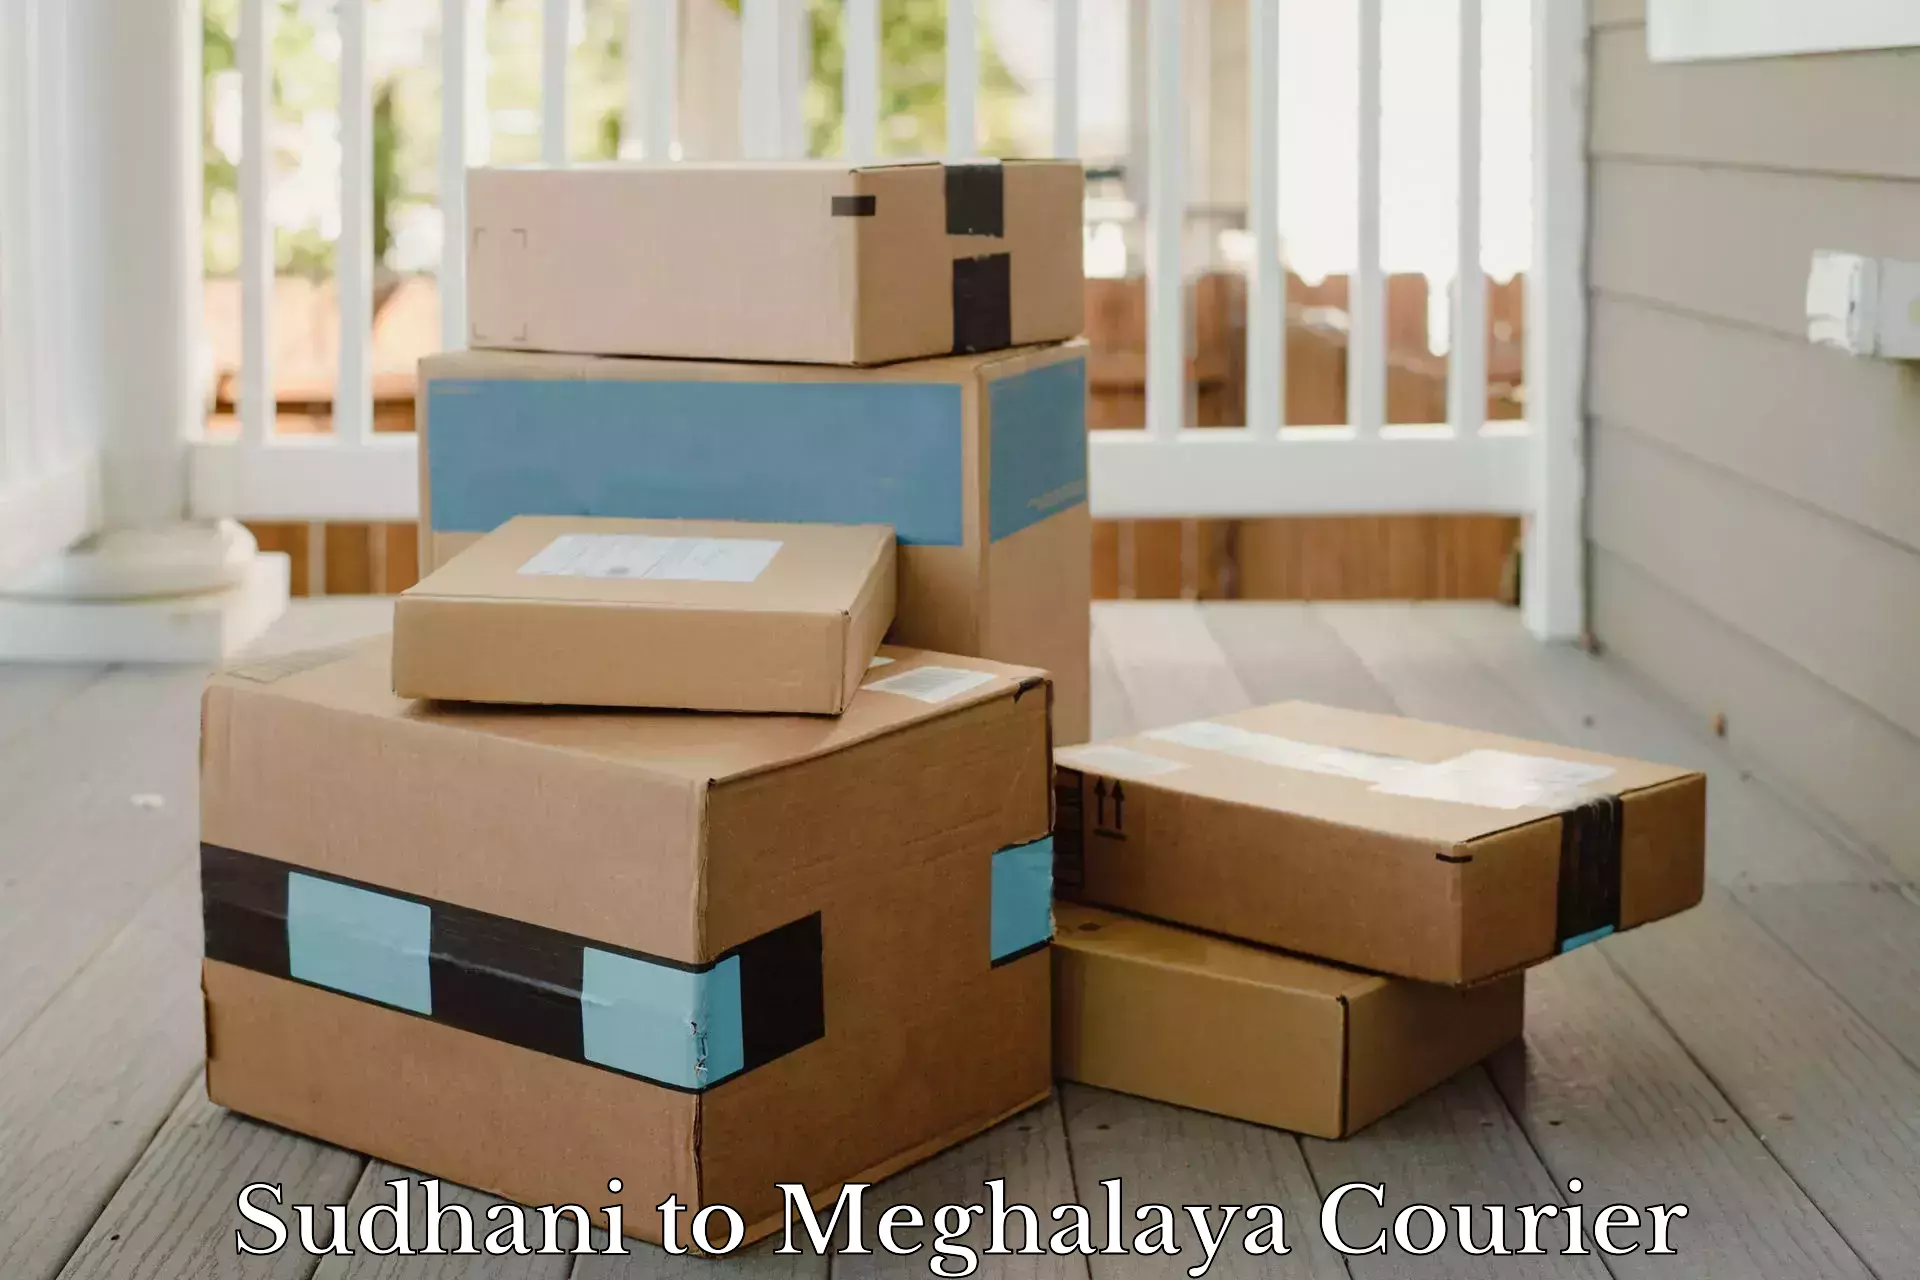 State-of-the-art courier technology Sudhani to Cherrapunji